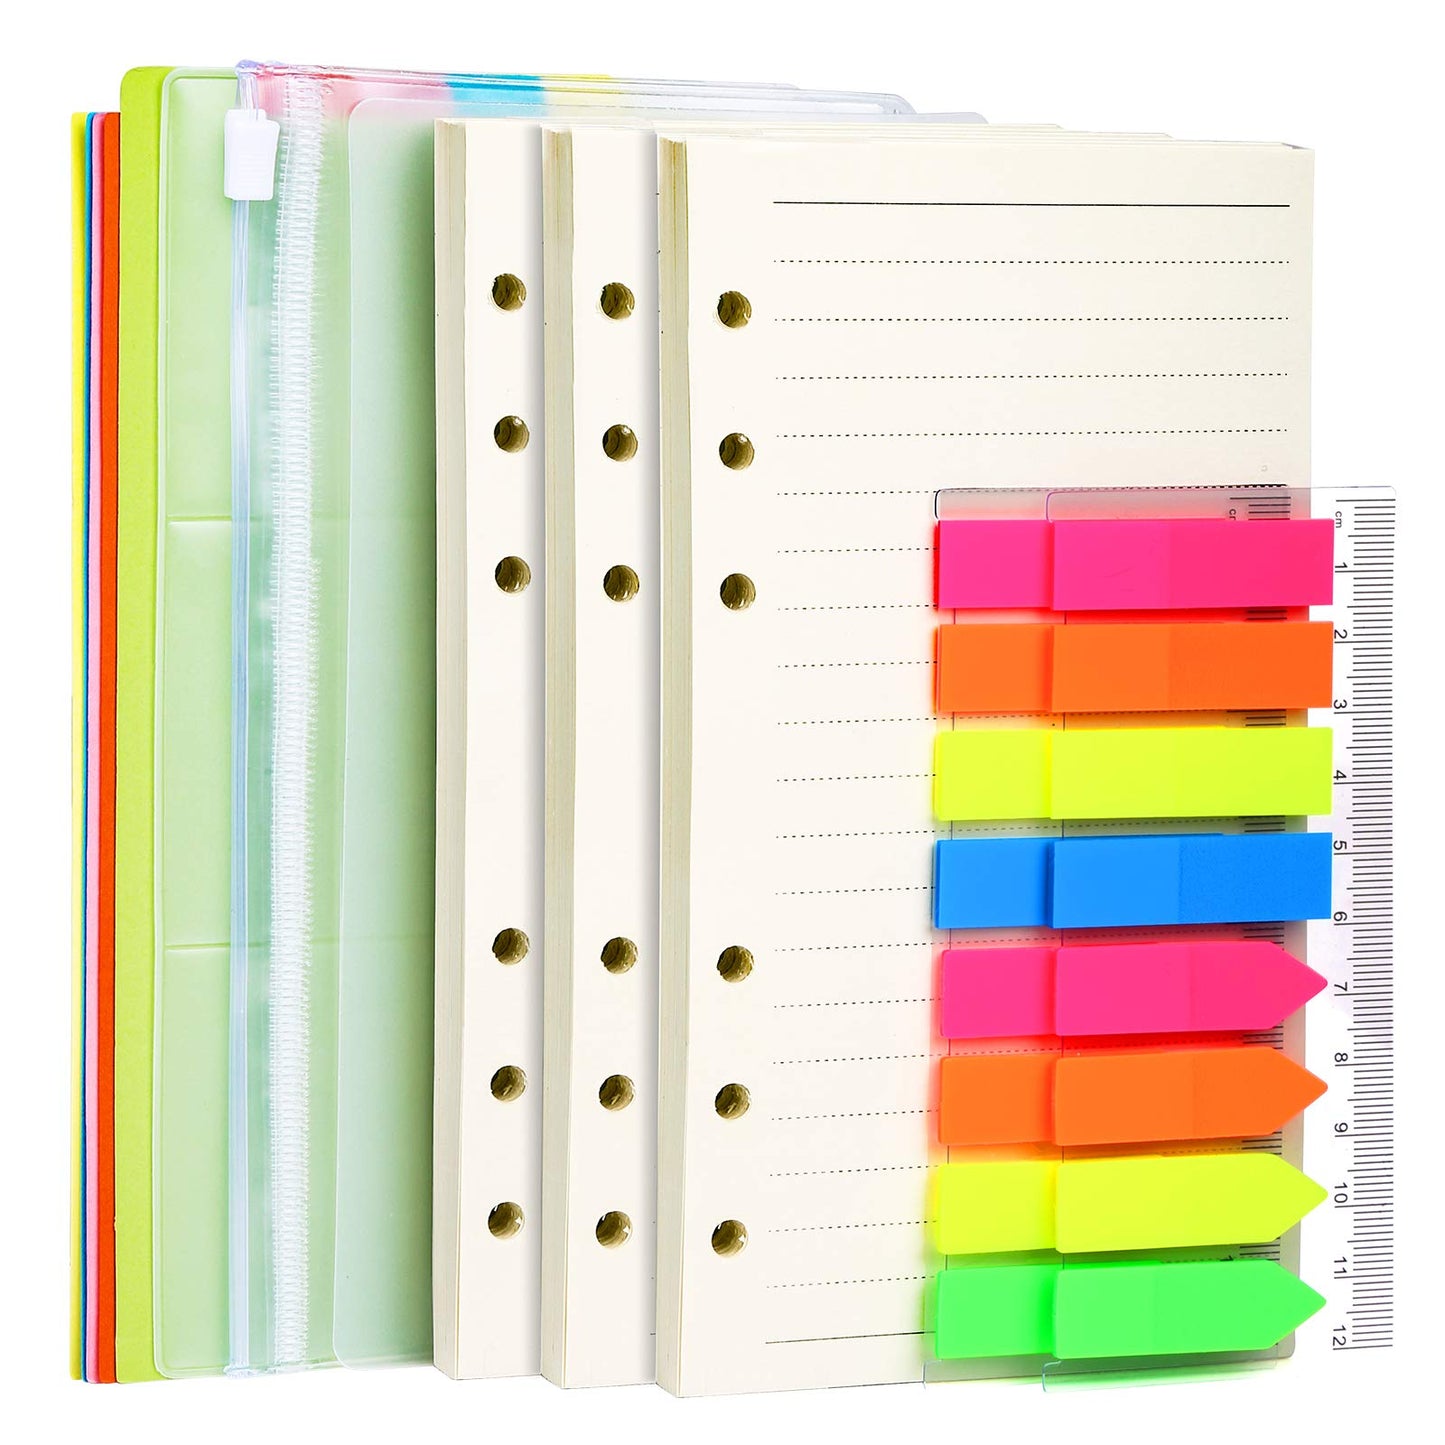 A6 Refill Paper, 3 Pack 45PCS A6 6 Ring Loose Leaf Paper, 2 Pack 160PCS Neon Page Markers, with Binder Pockets & Binder Dividers, LEOBRO A6 Lined Paper Refills for A6 Binder Planner Notebook Journal